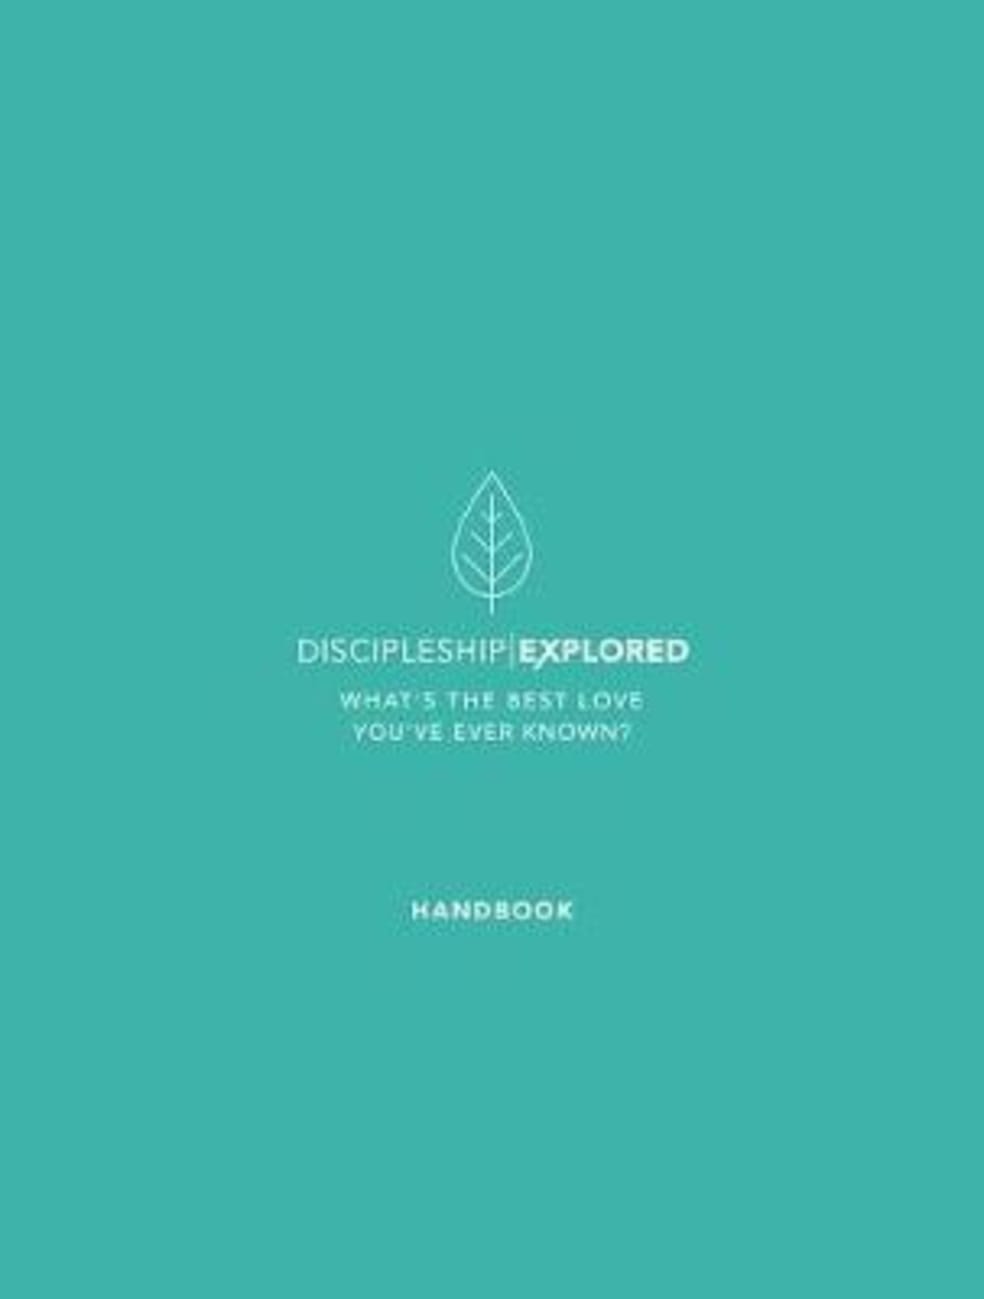 Discipleship Explored: What's the Best Love You've Ever Known? Revised 2017 (Handbook) Paperback